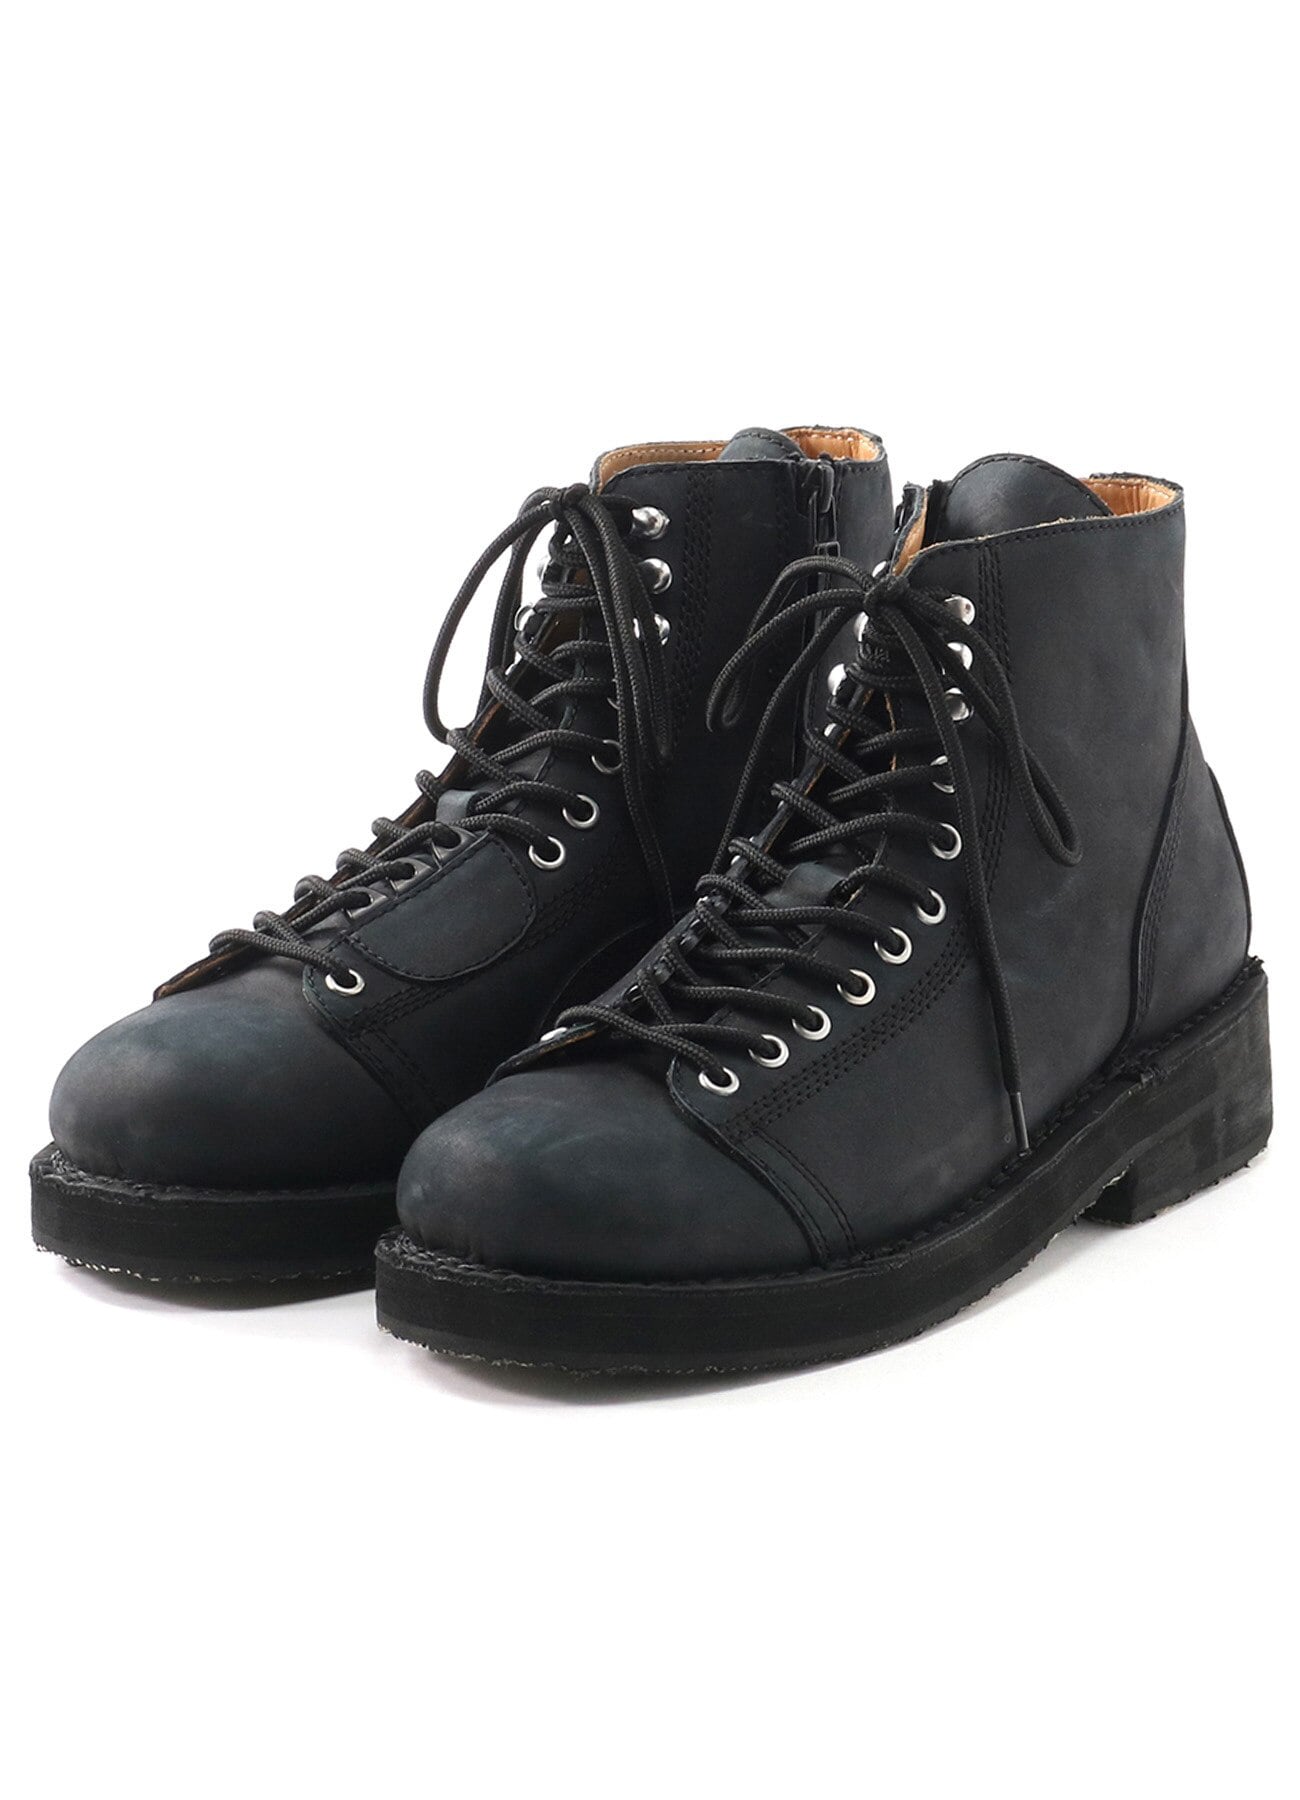 MAT SMOOTH LEATHER FASTENER BIKER'S BOOTS